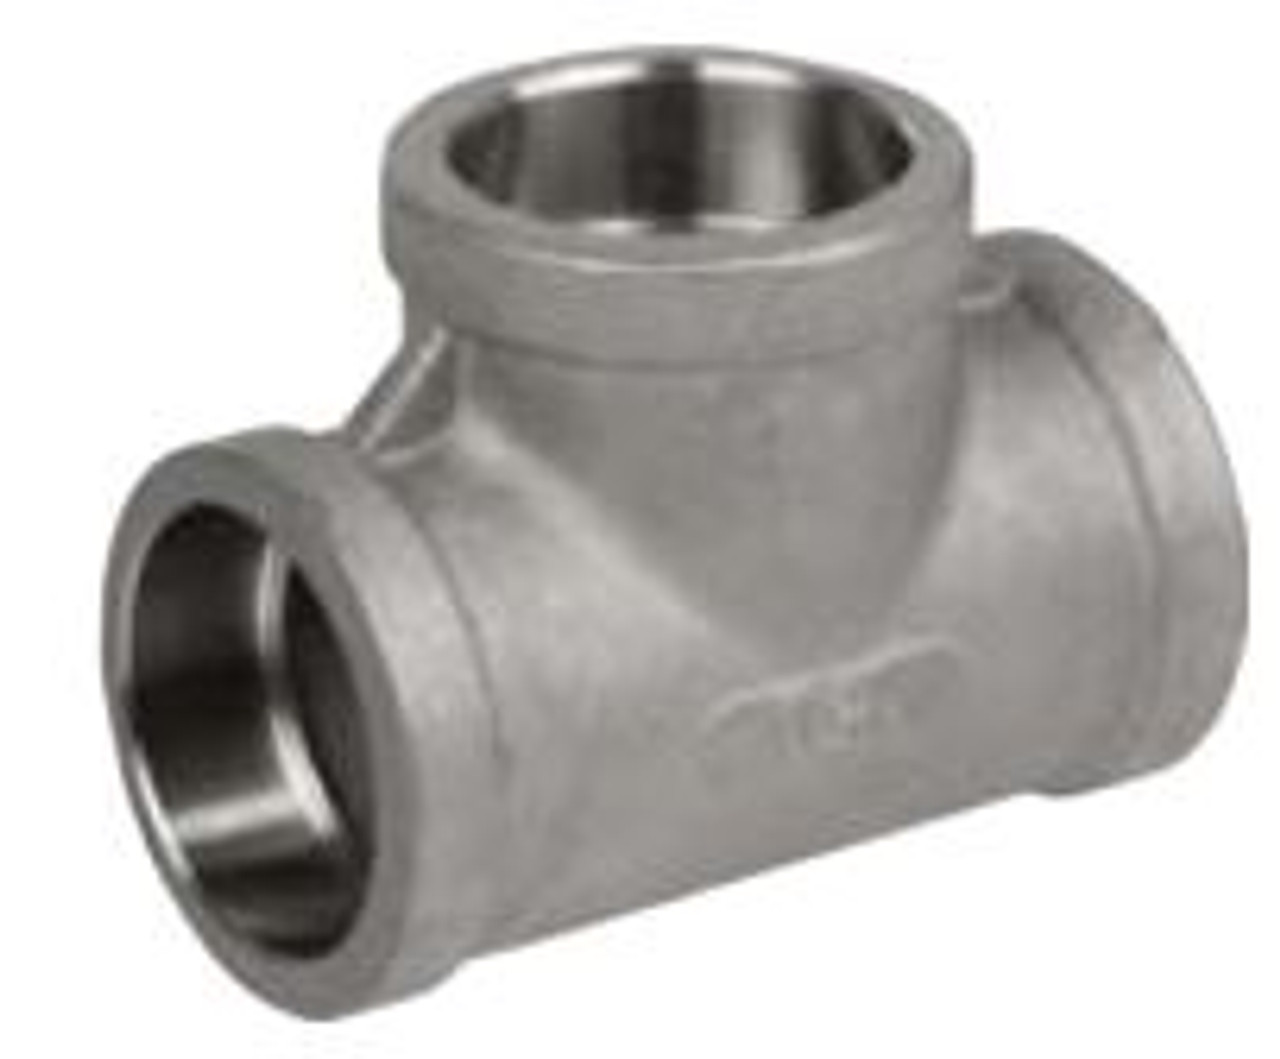 Reducing Coupling MSS SP-114 Stainless Steel 316 Cast Pipe Fitting 1-1/4 X 3/8 NPT Female